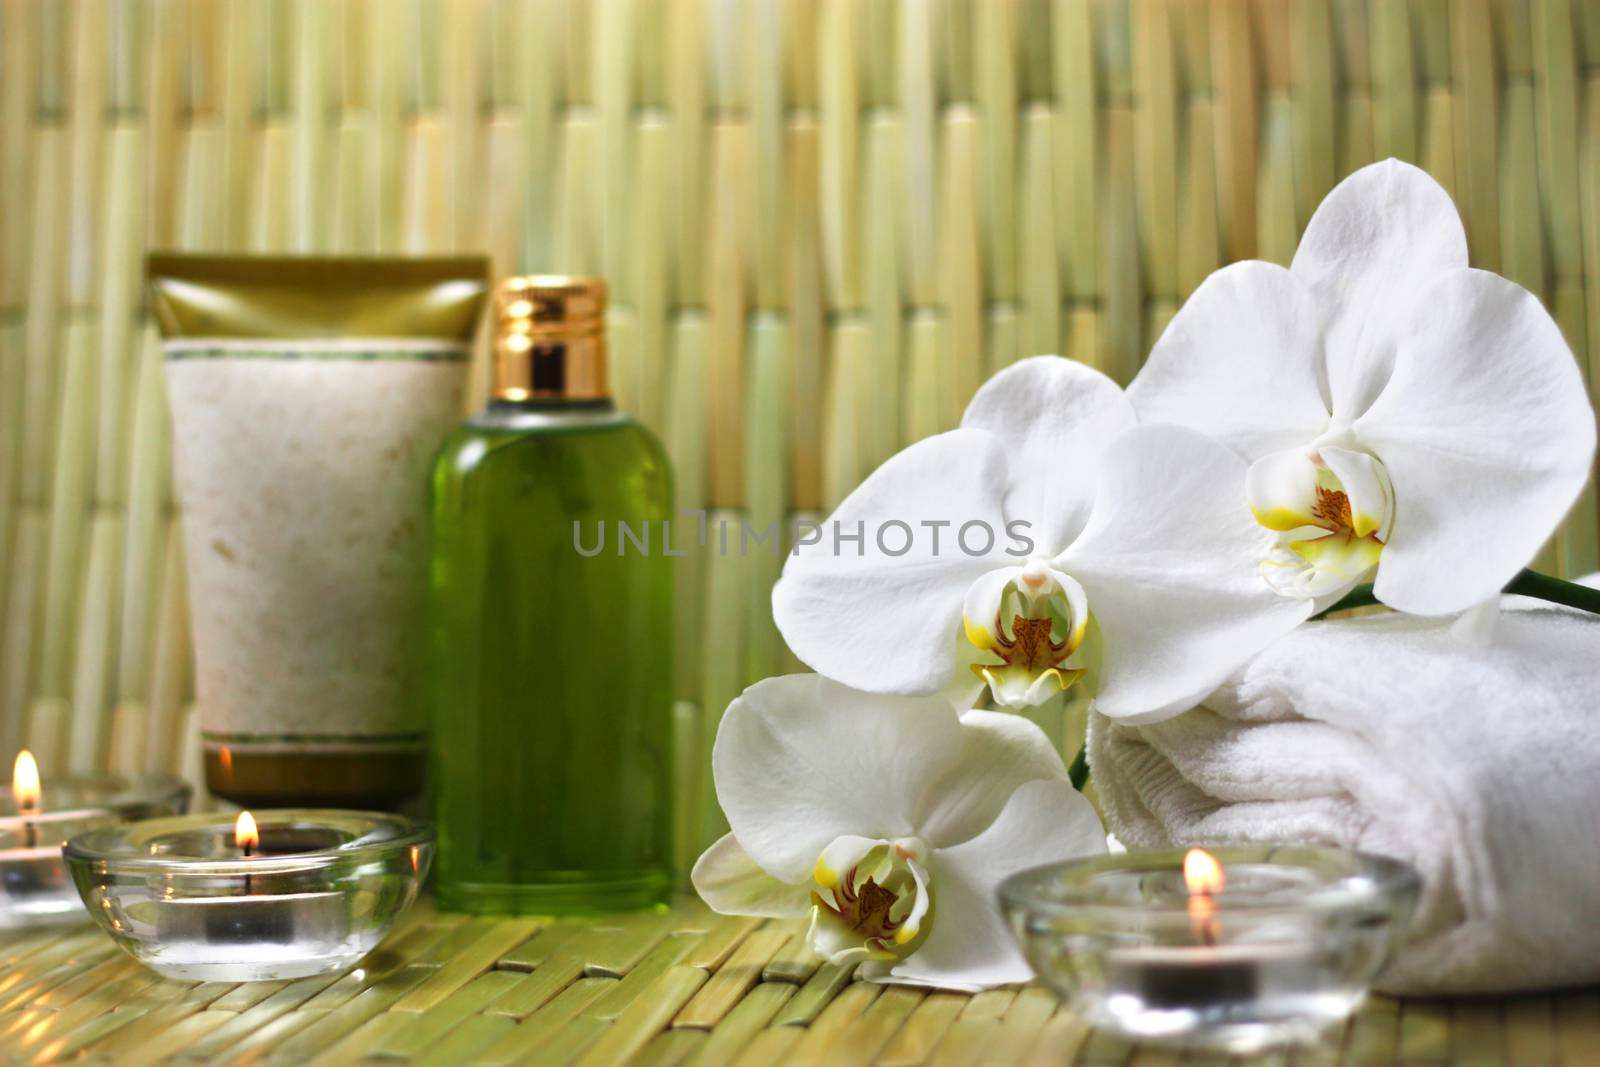 Orchid, candles and body care products in the spa